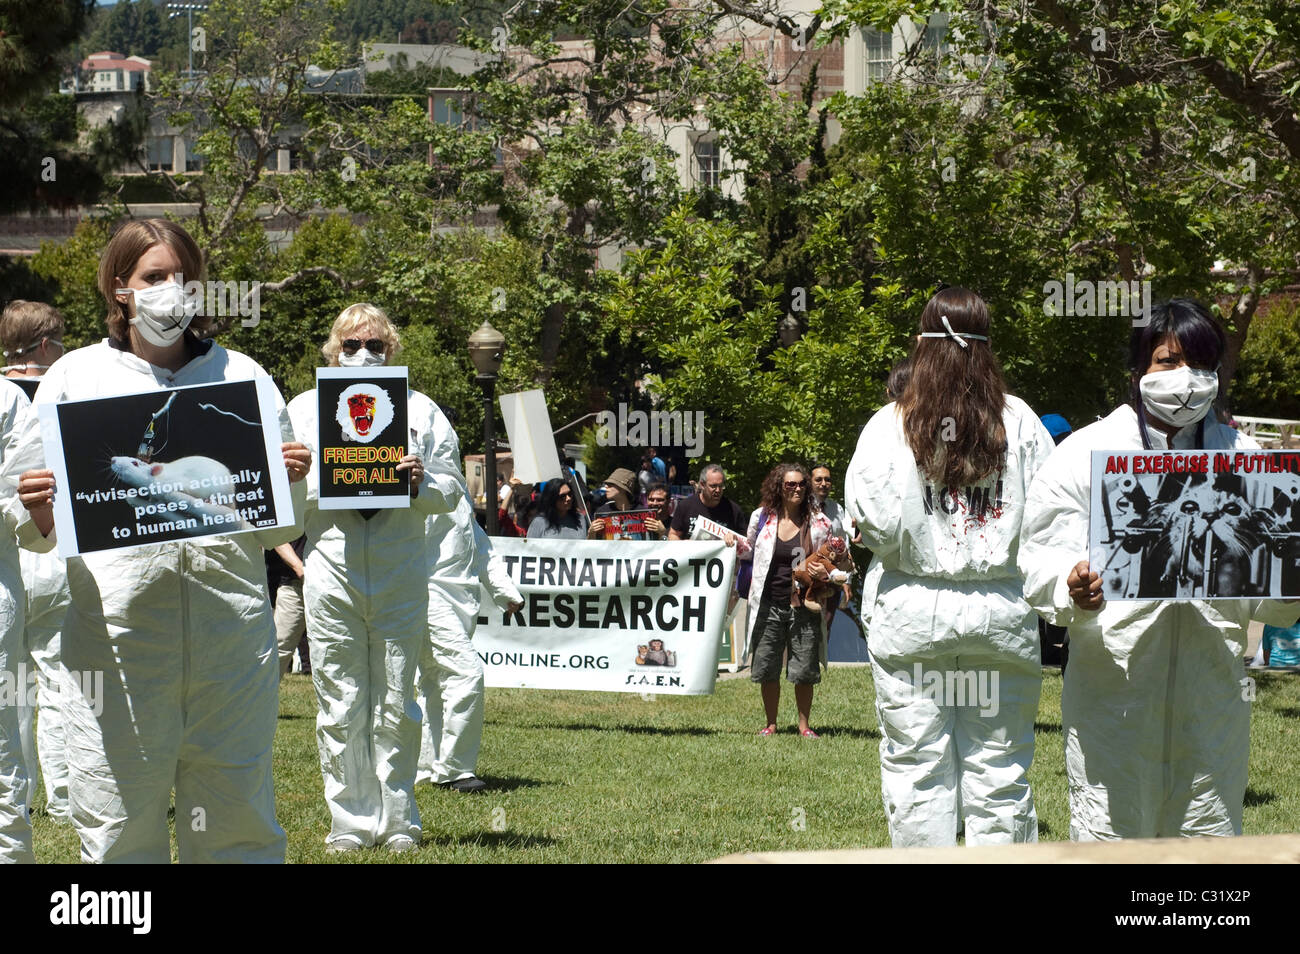 Animal Rights Protesters Carrying Anti-Vivisection Signs Protest Laboratory Research Experiments on Animals at UCLA in L.A. Stock Photo